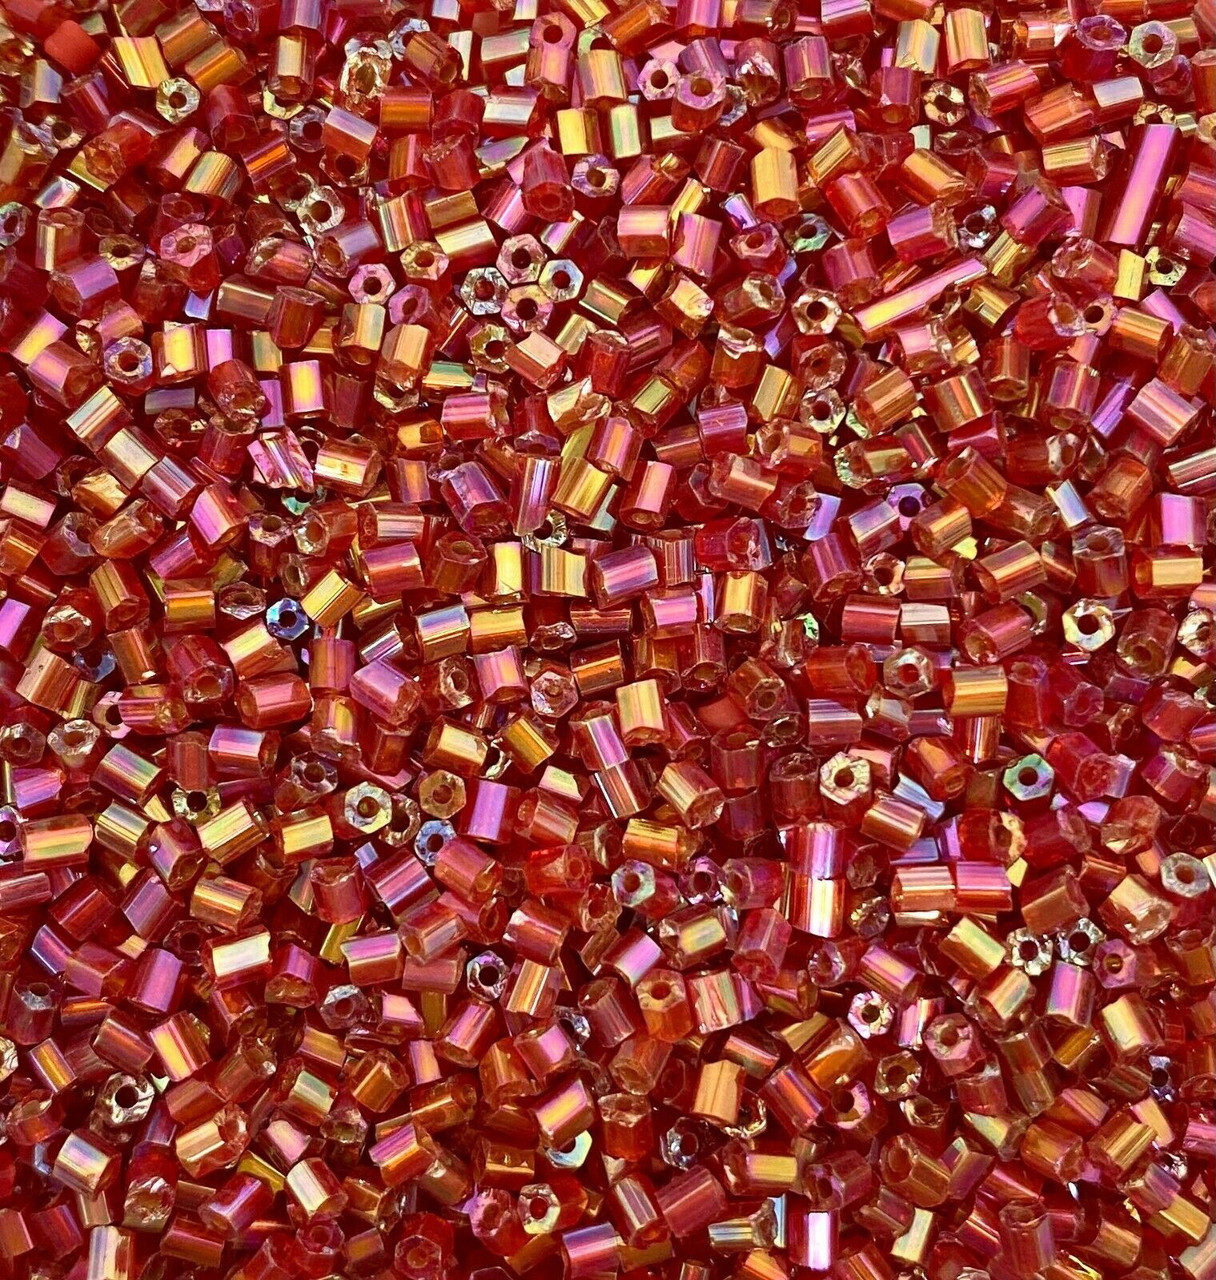 50g glass HEX seed beads - Crimson Rainbow, size 11/0 (approx 2mm)